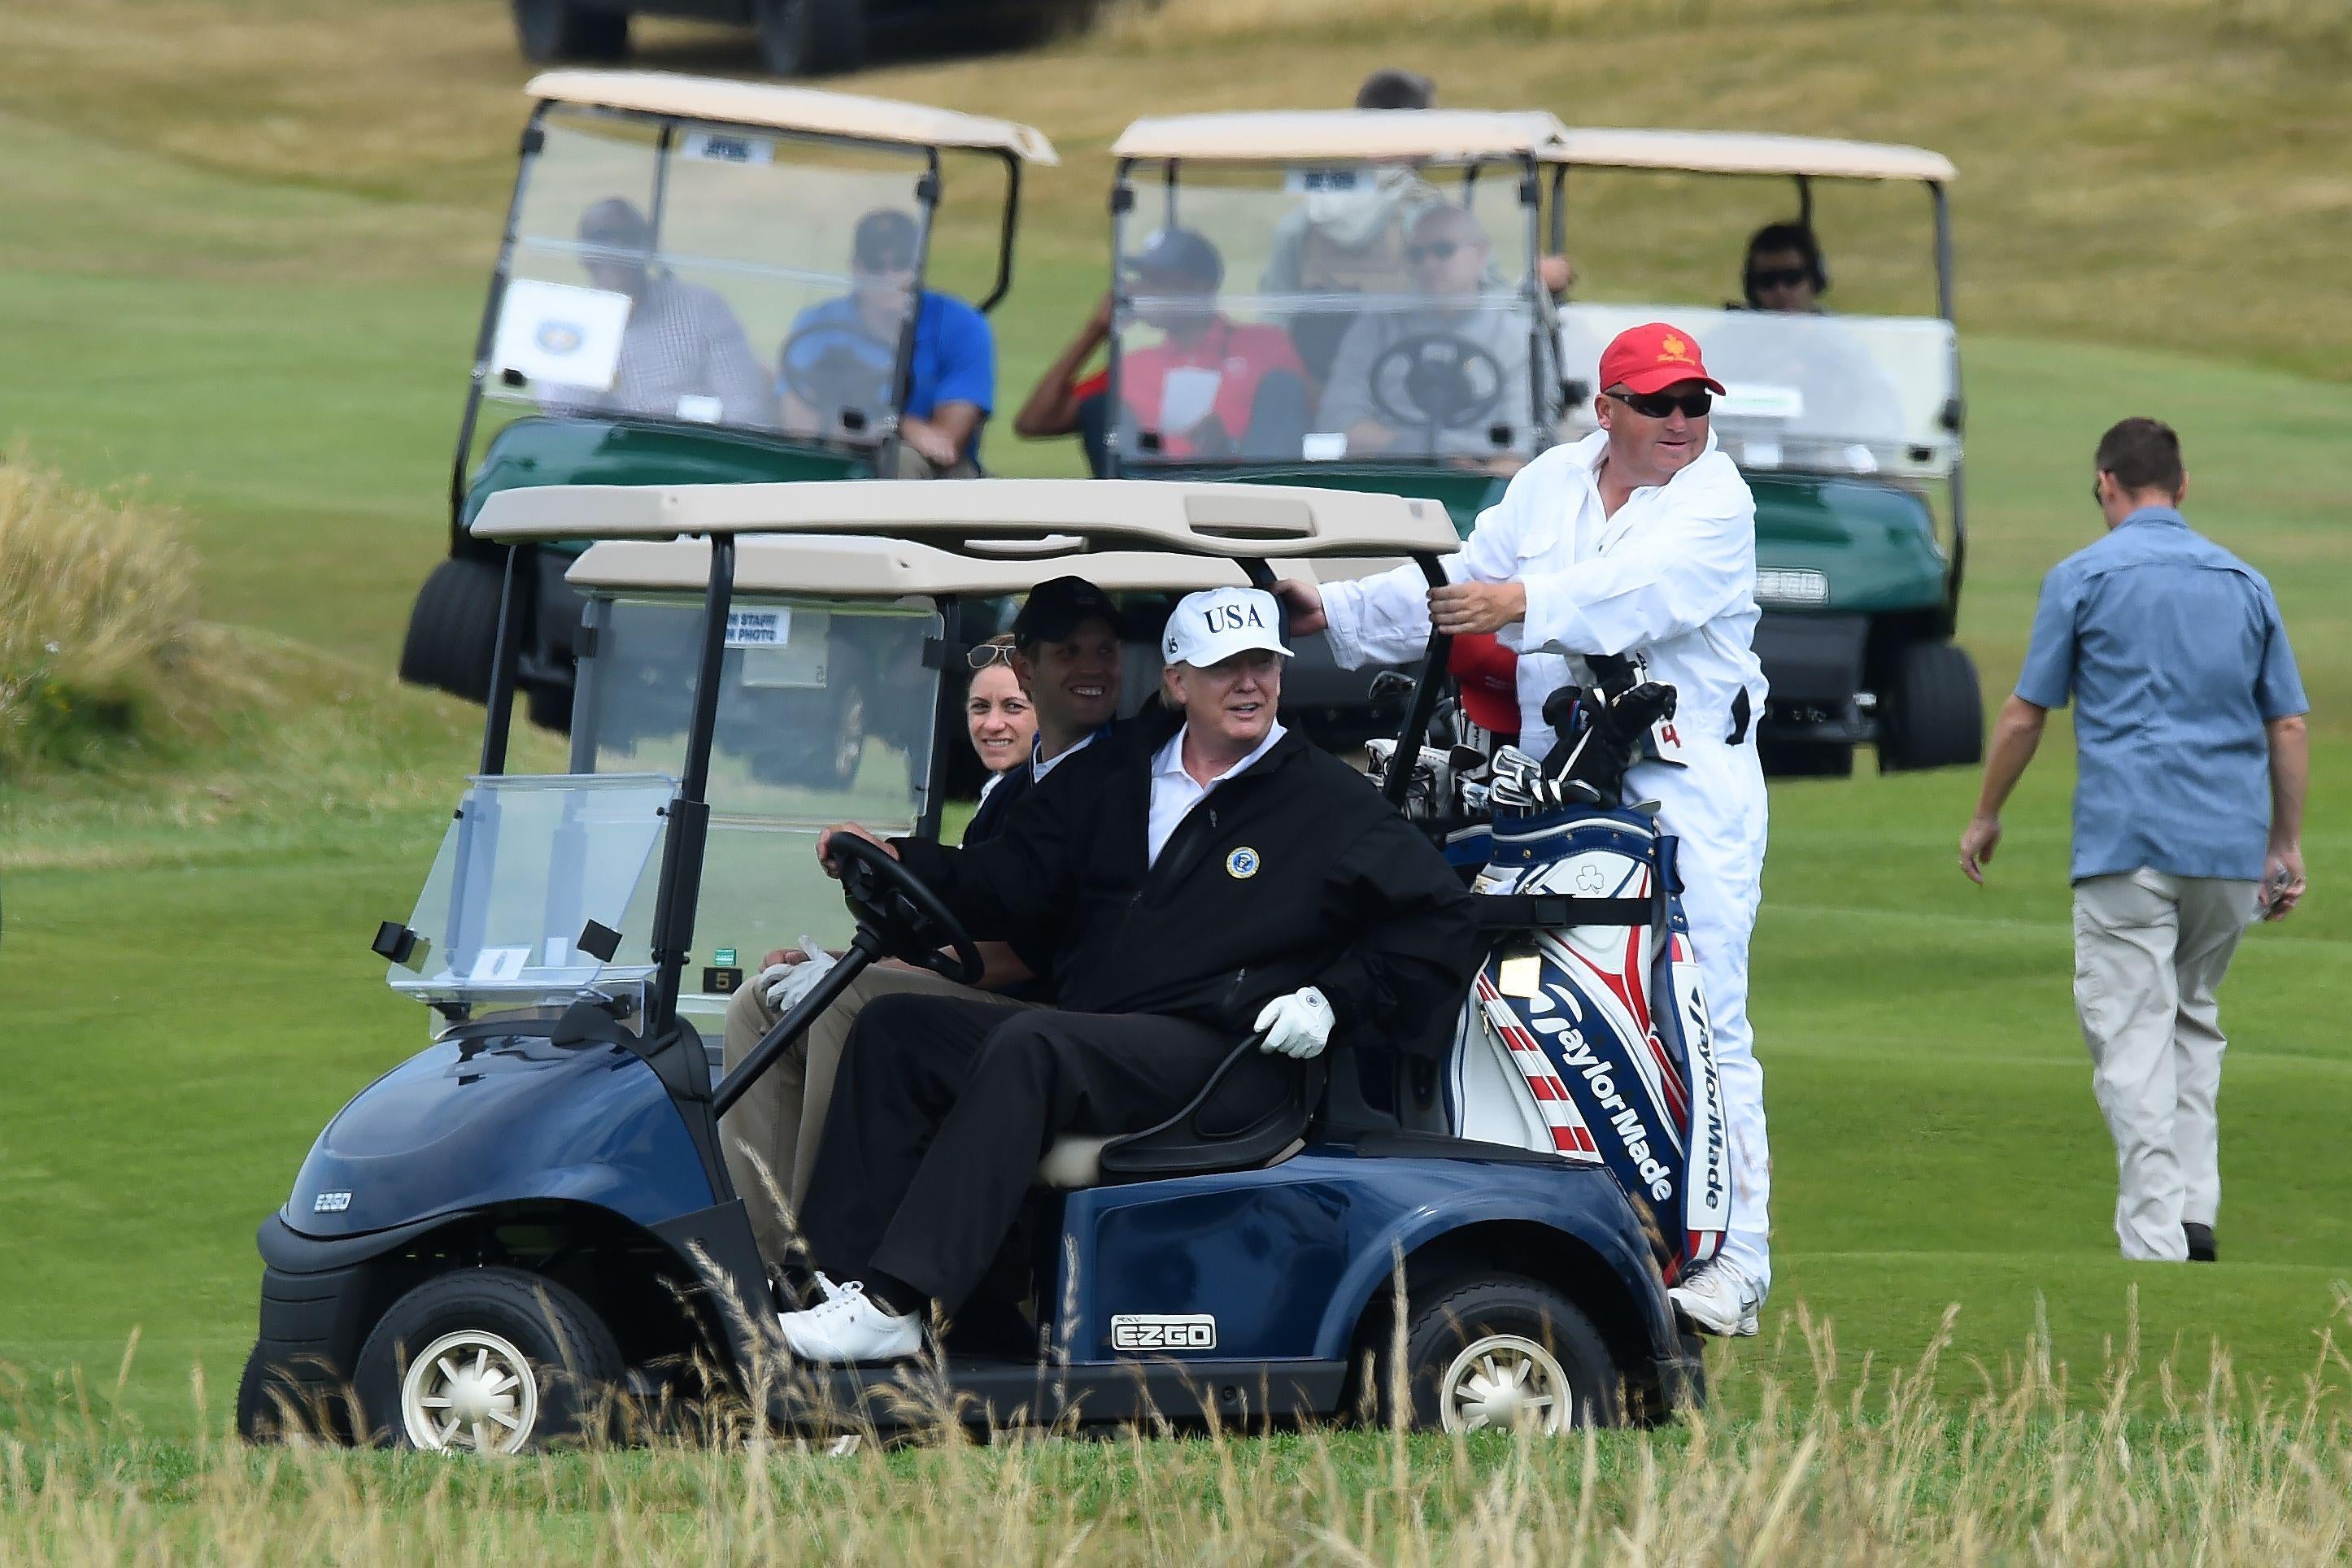 US President Donald Trump (C) sits in a golf cart as he plays a round of golf on the Ailsa course at Trump Turnberry, the luxury golf resort of US President Donald Trump, in Turnberry, southwest of Glasgow, Scotland on July 14, 2018, during the private part of his four-day UK visit. - US President Donald Trump wraps up a four-day visit to Britain, dominated by his blasting of Prime Minister Theresa May's Brexit strategy, by spending the weekend in Scotland. (Photo by ANDY BUCHANAN / AFP)        (Photo credit should read ANDY BUCHANAN/AFP/Getty Images)